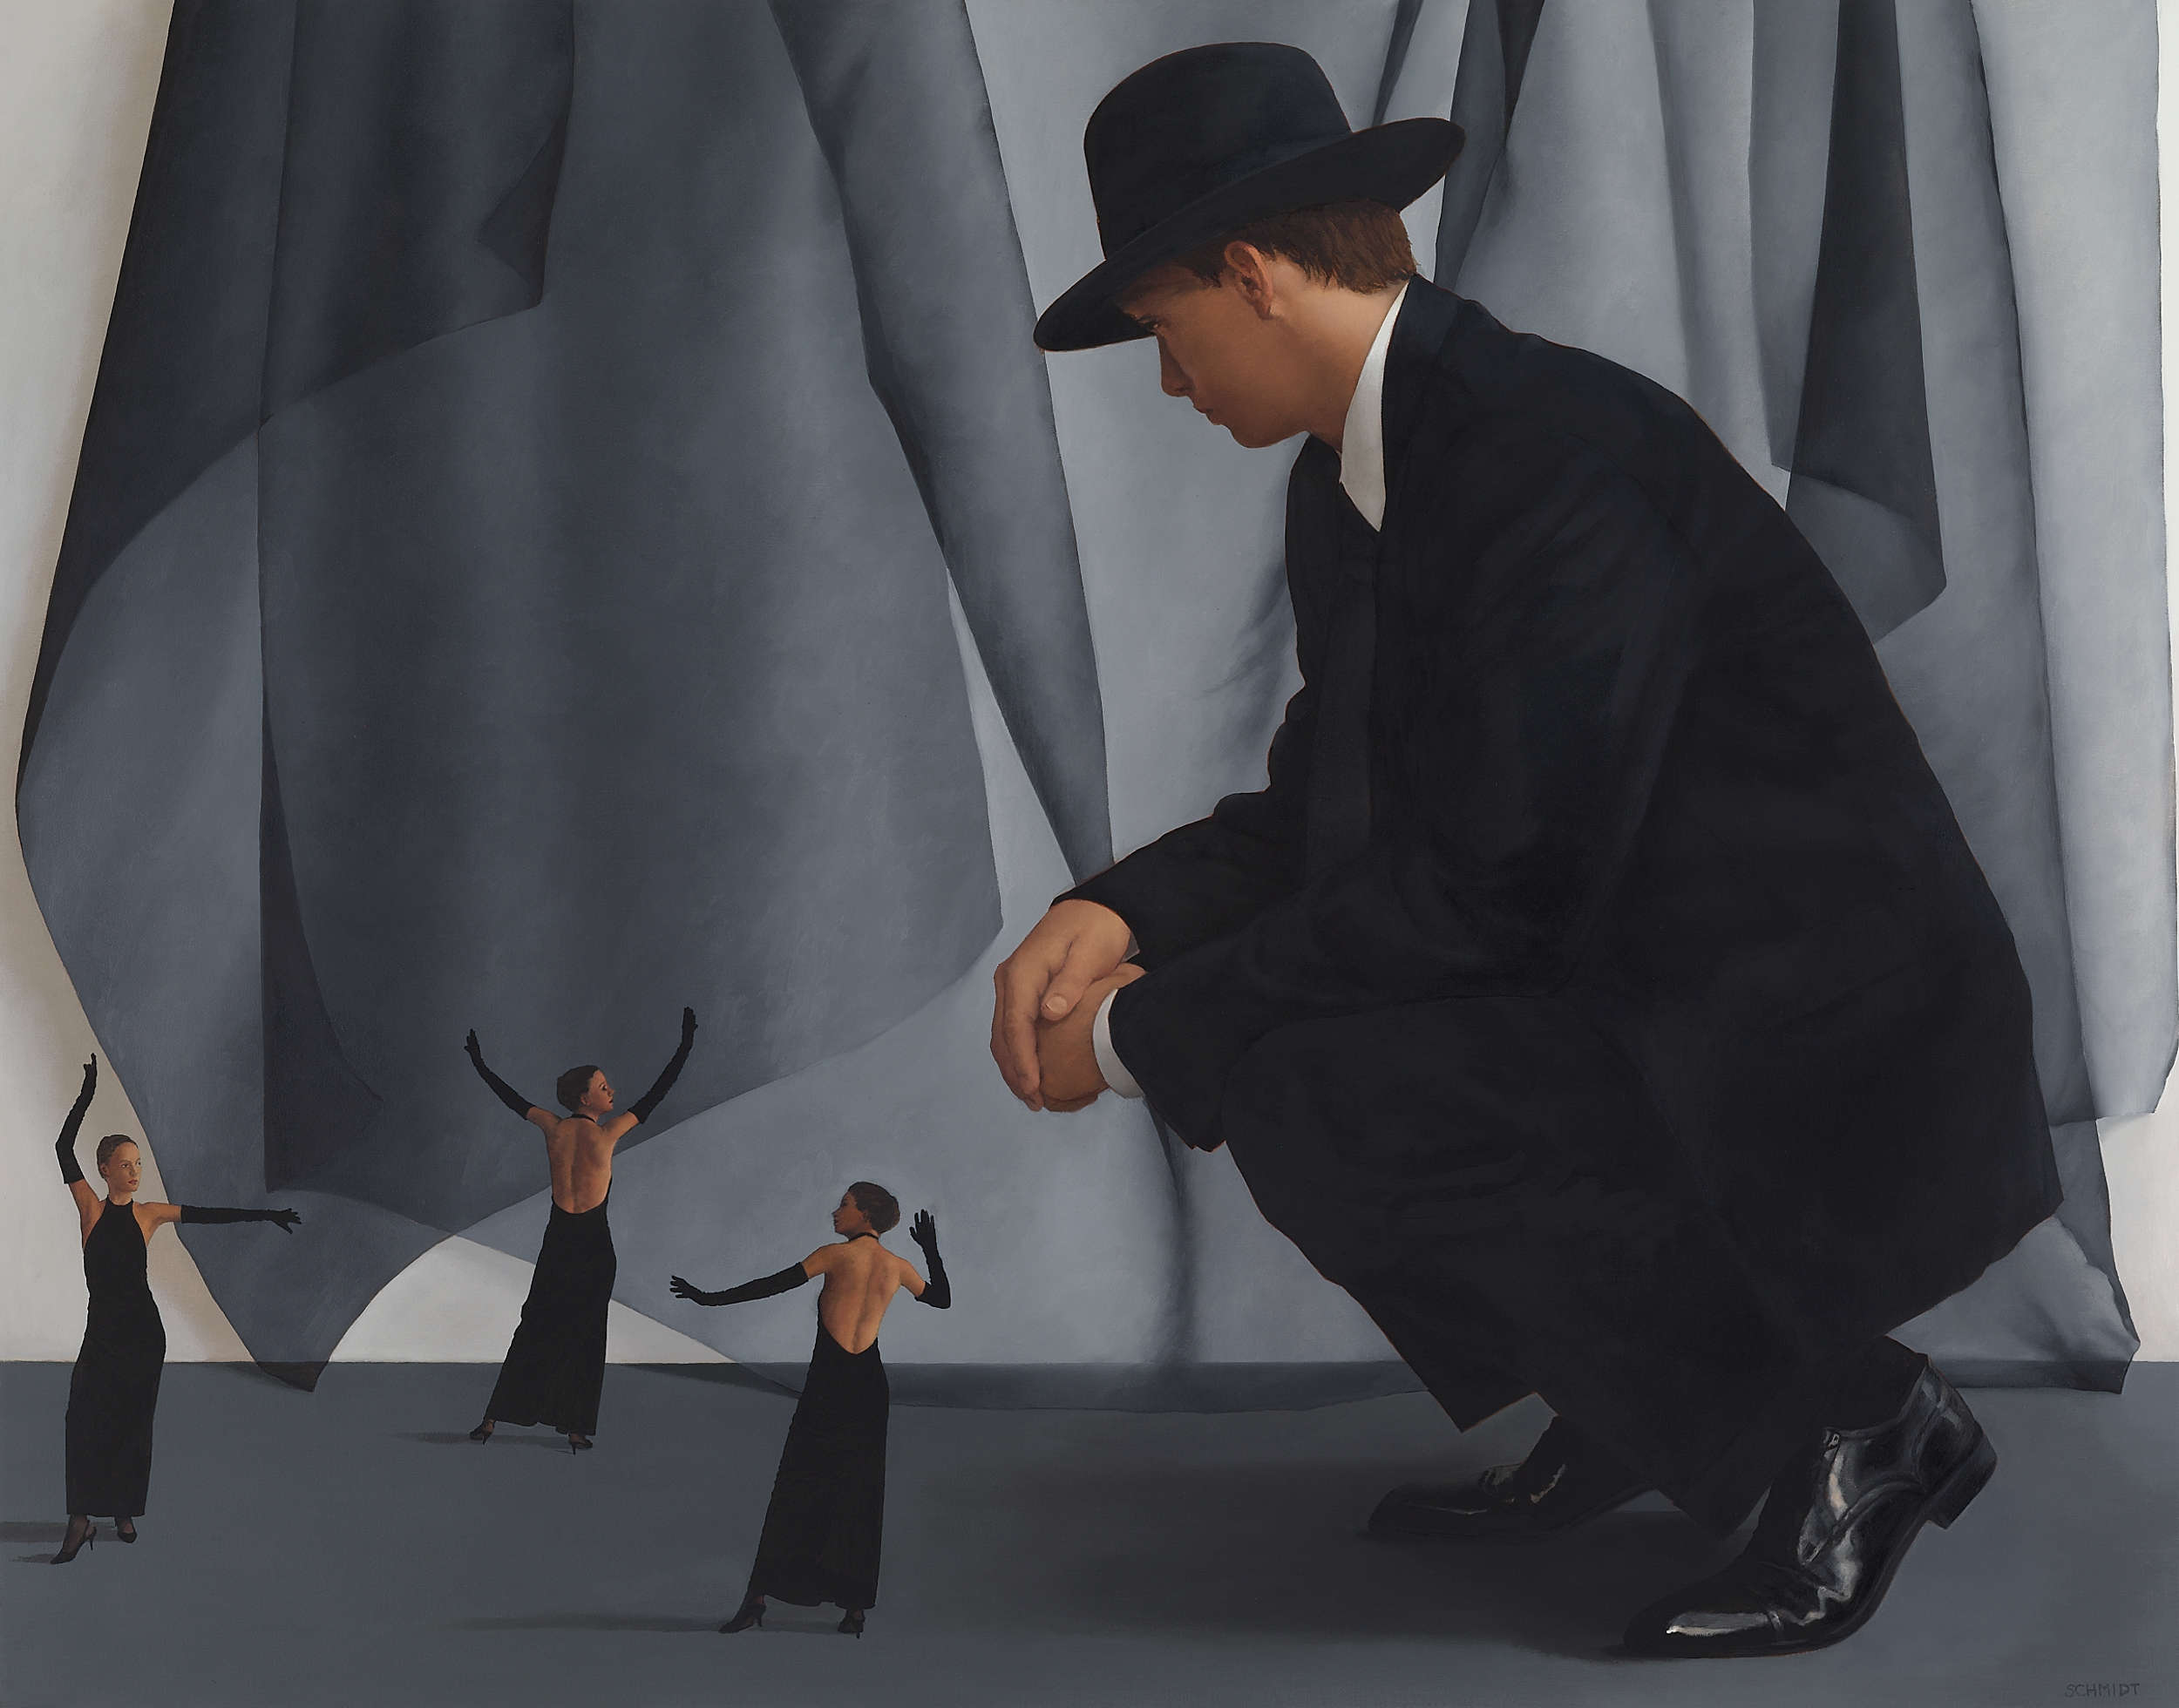 male figure wearing suit and fedora hat crouching and watching 3 diminutive female figures dancing, wearing black evening gloves